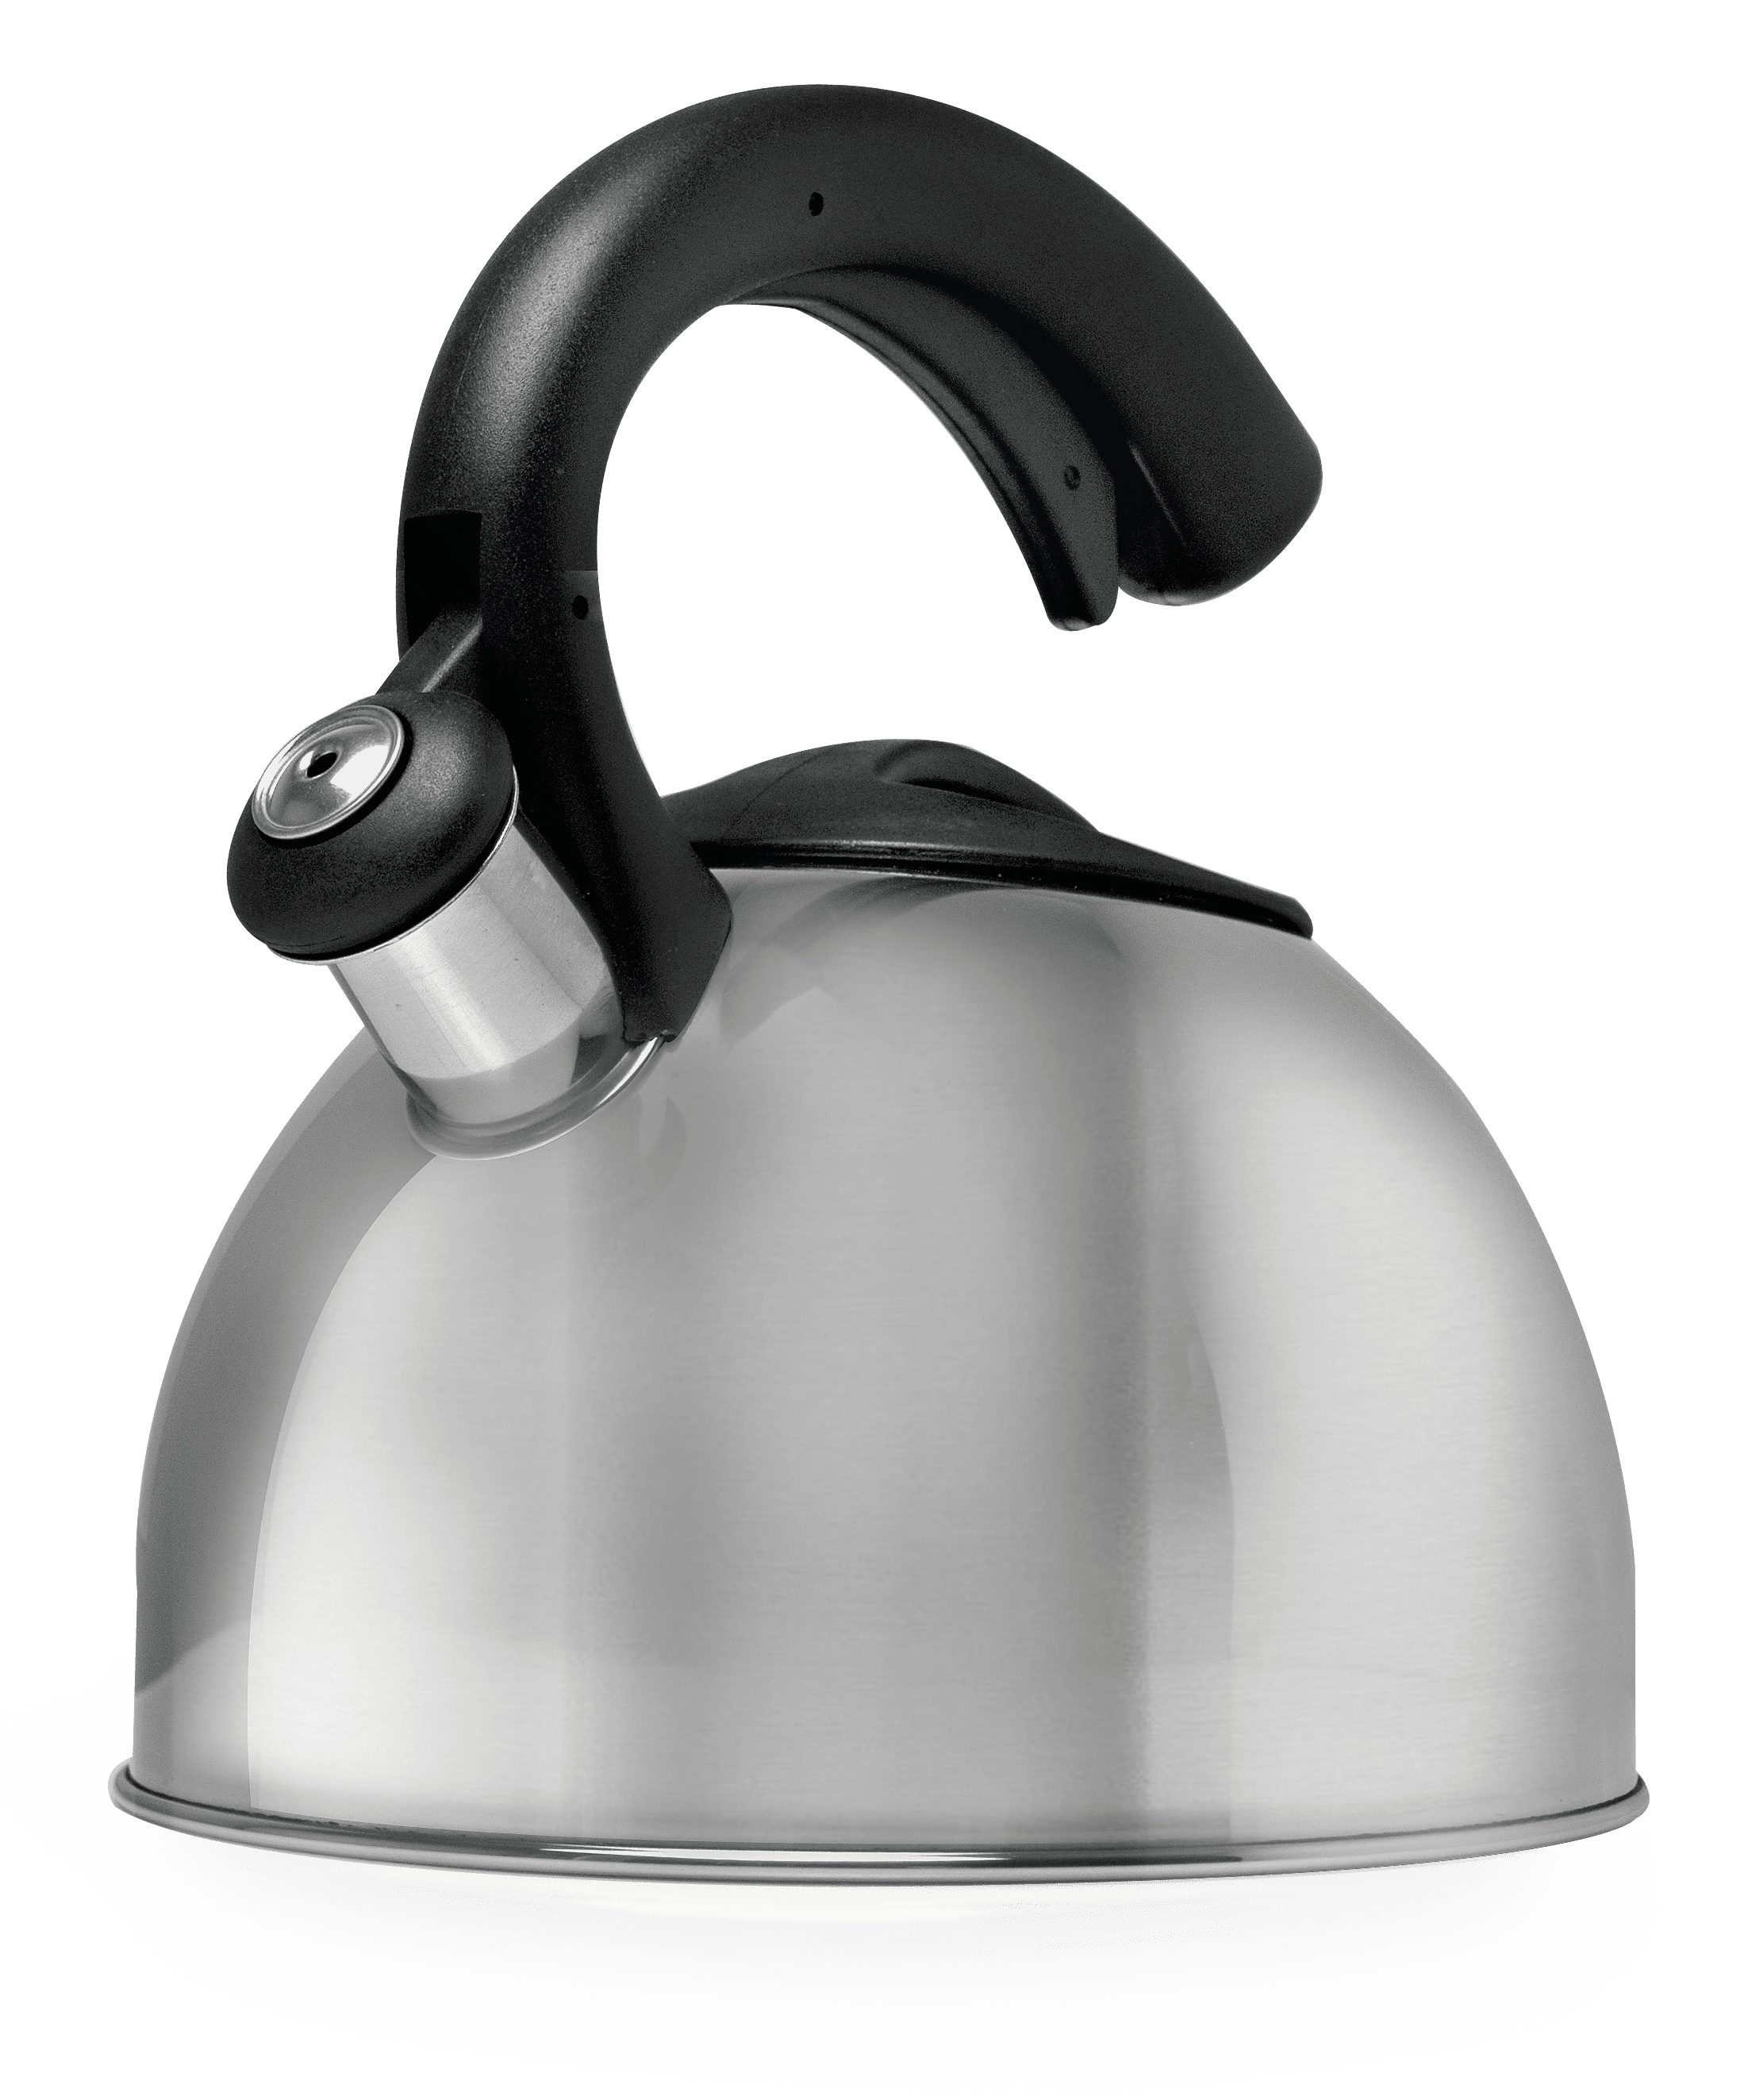 Primula Today Whistling Kettle, H2O, 3 Qt